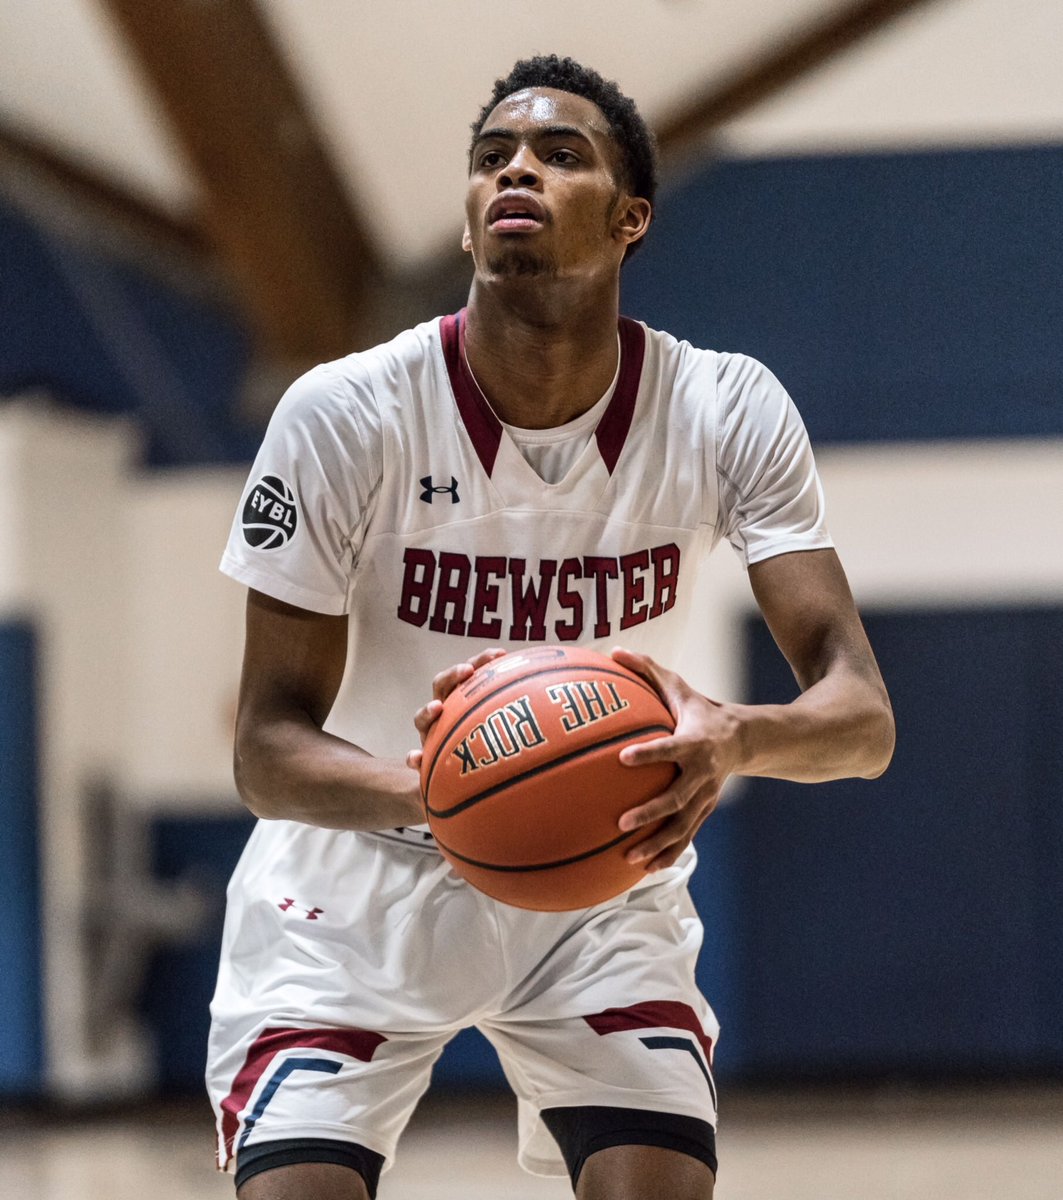 Happy Birthday to Brewster Academy graduate, Isaiah Mucius '18! Mucius was the 2018 NEPSAC Class AAA Player of the Year!